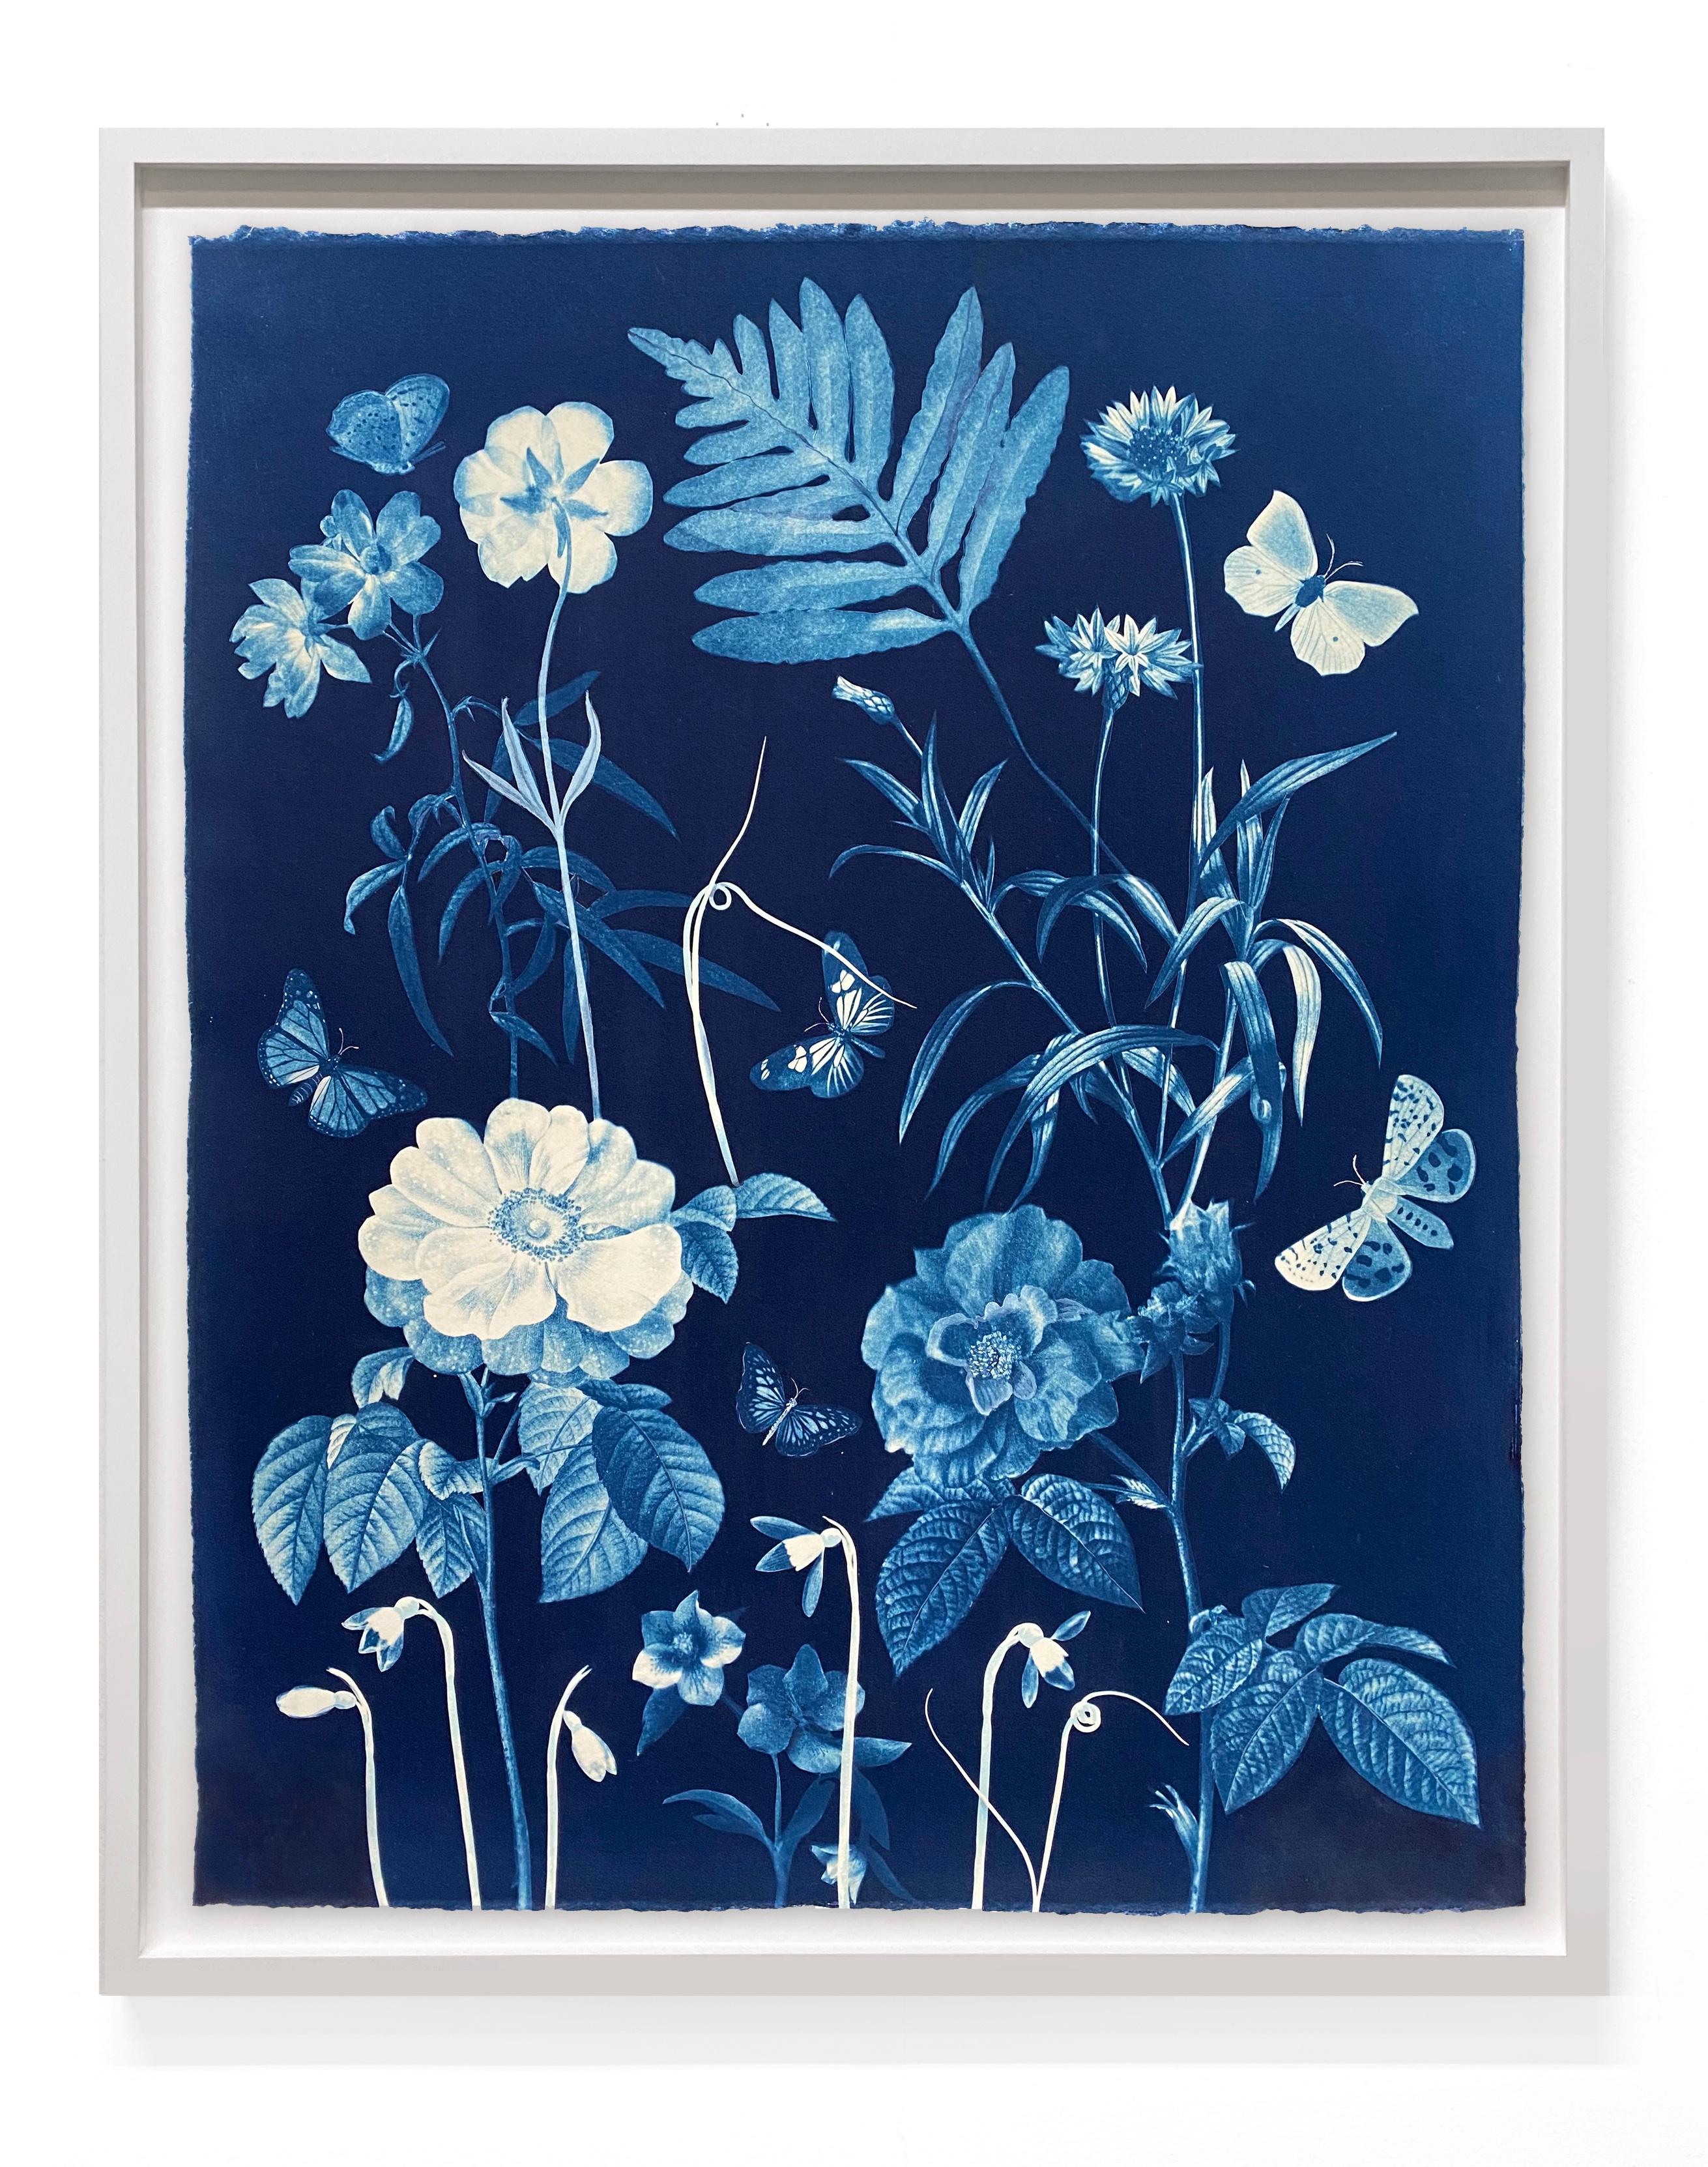 Cyanotype Painting Roses, Snowdrops, Pollinators, Botanical Painting on Blue - Contemporary Art by Julia Whitney Barnes